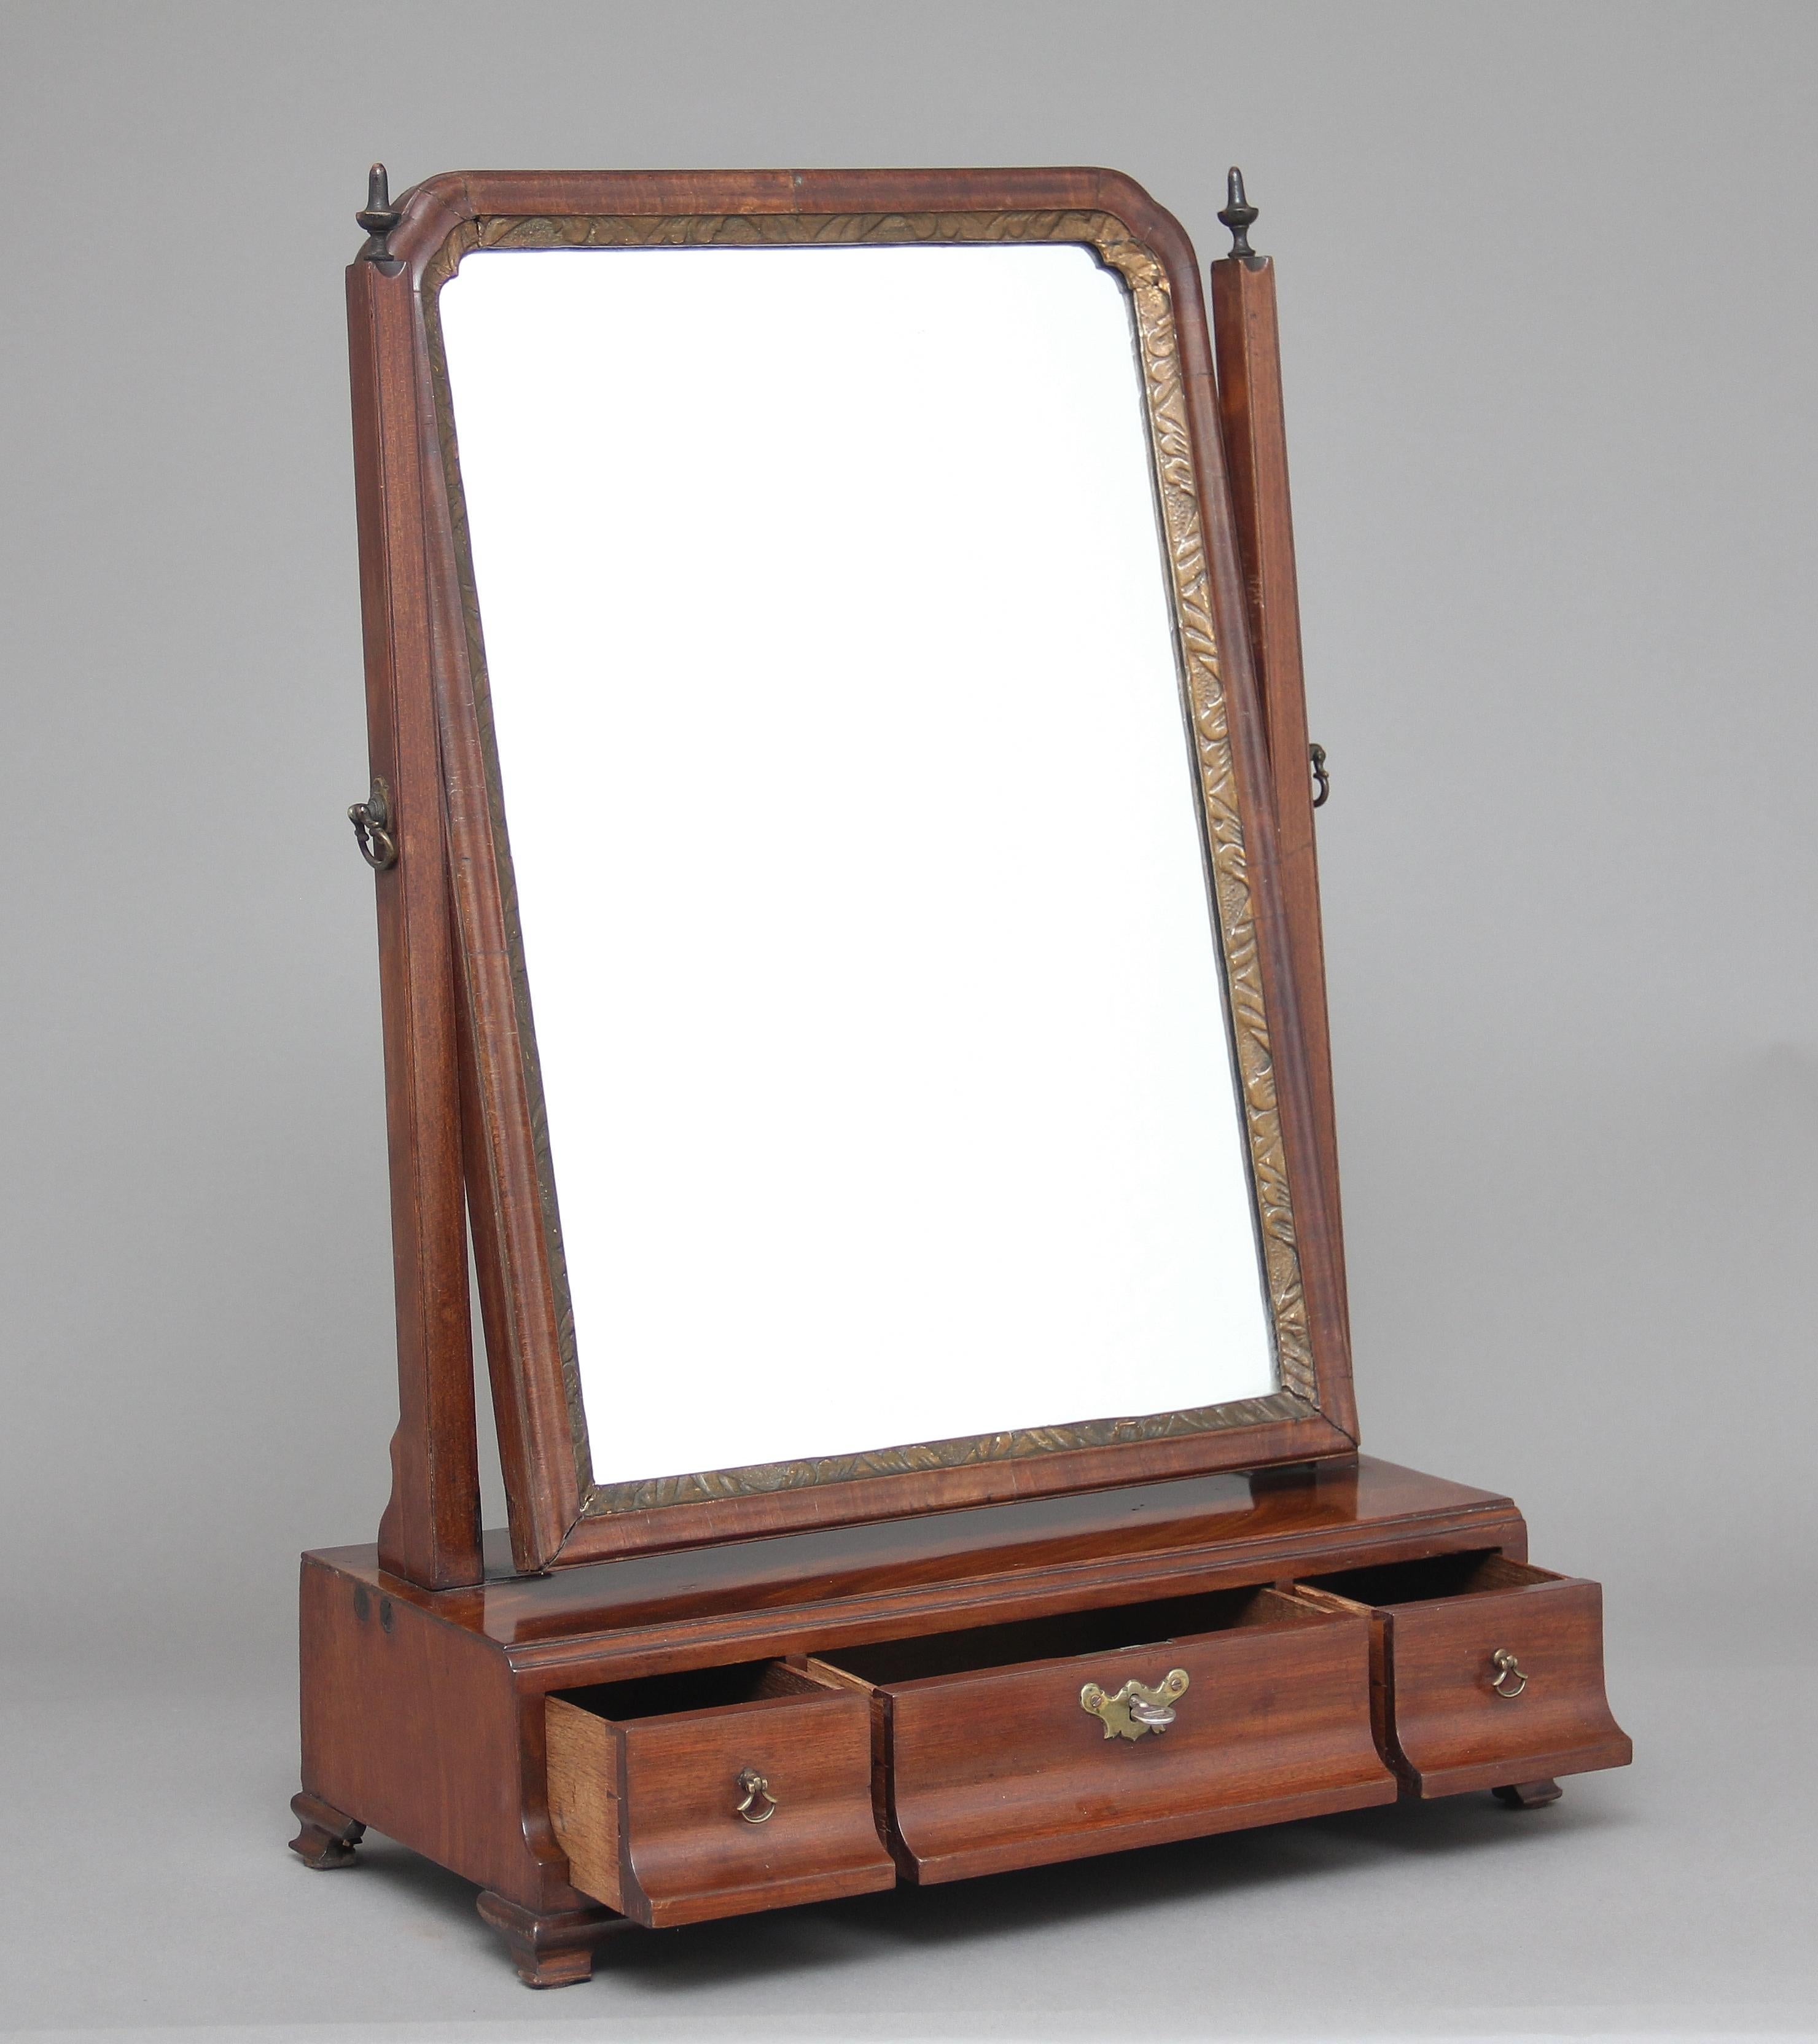 Early 19th century mahogany dressing table / toilet mirror, with a swivel mirror, the frame decorated with wooden finials on top, the base section having three oak lined drawers, standing on small ogee feet, circa 1800.
 